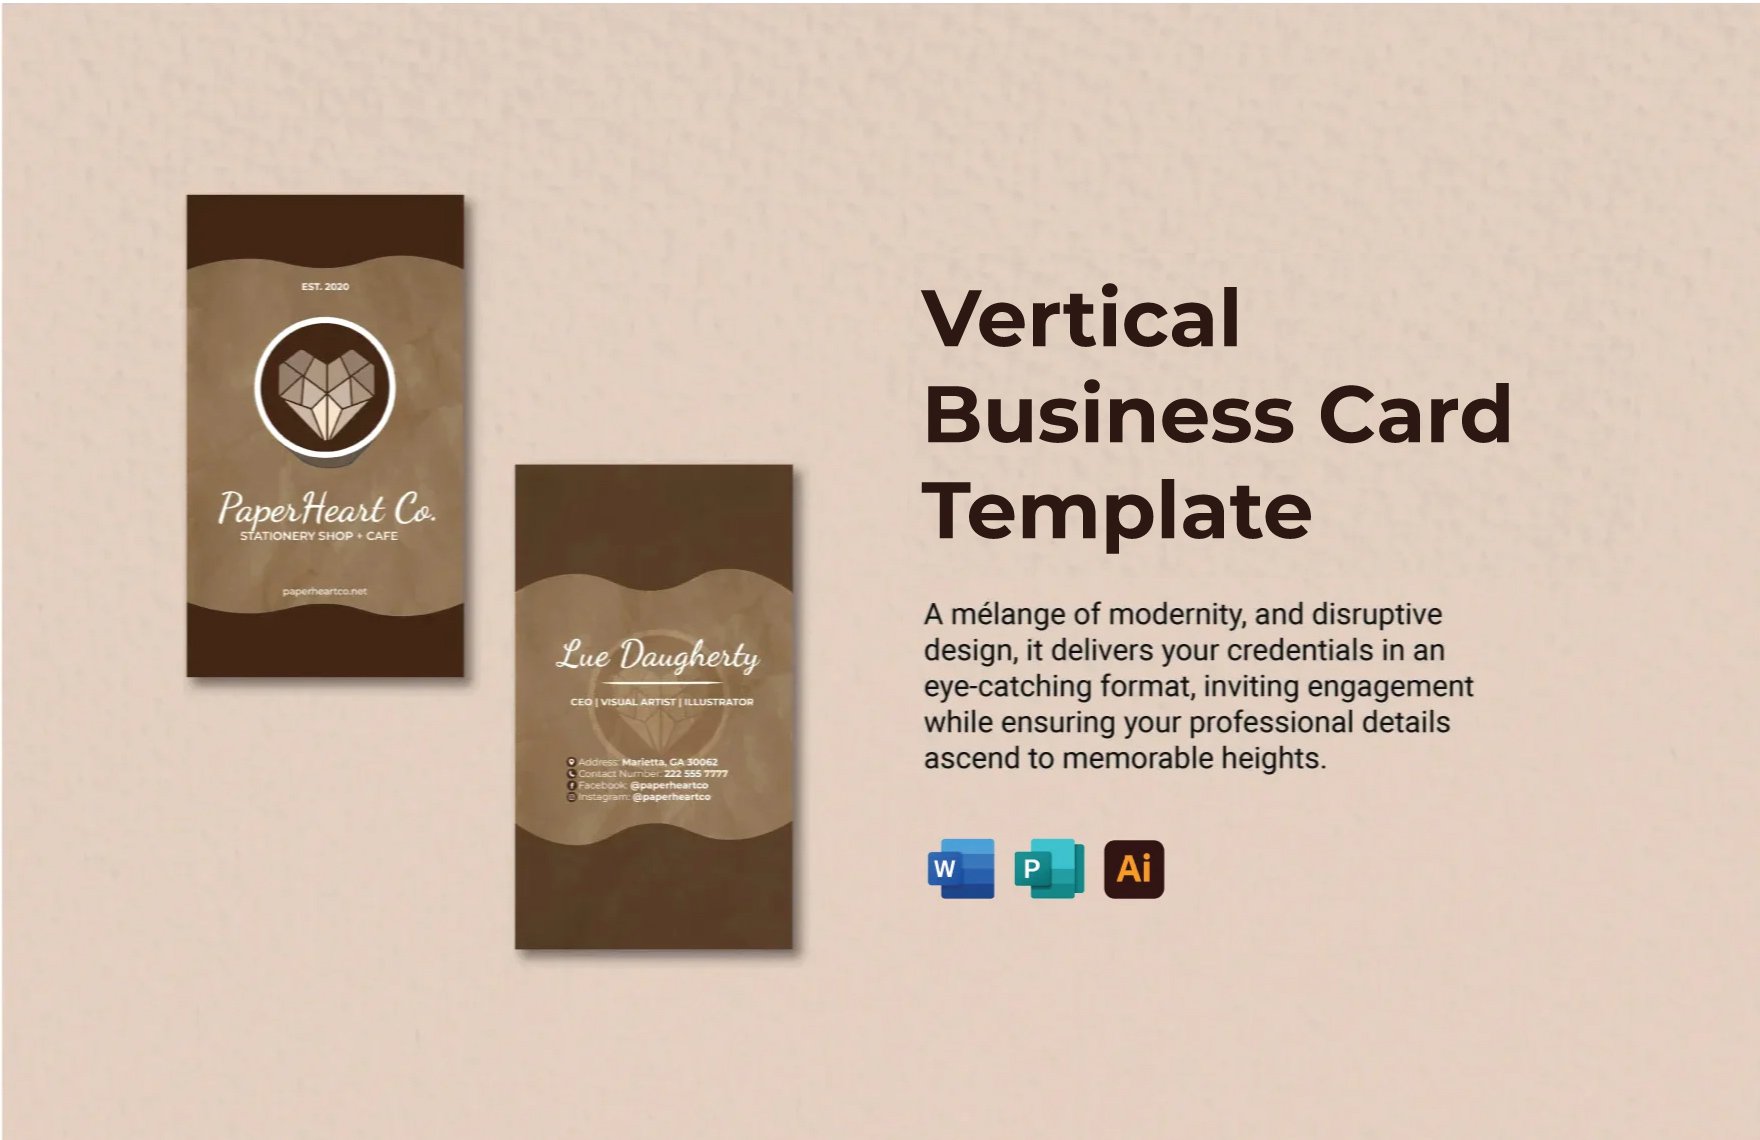 Vertical Business Card Template in Word, Illustrator, Publisher